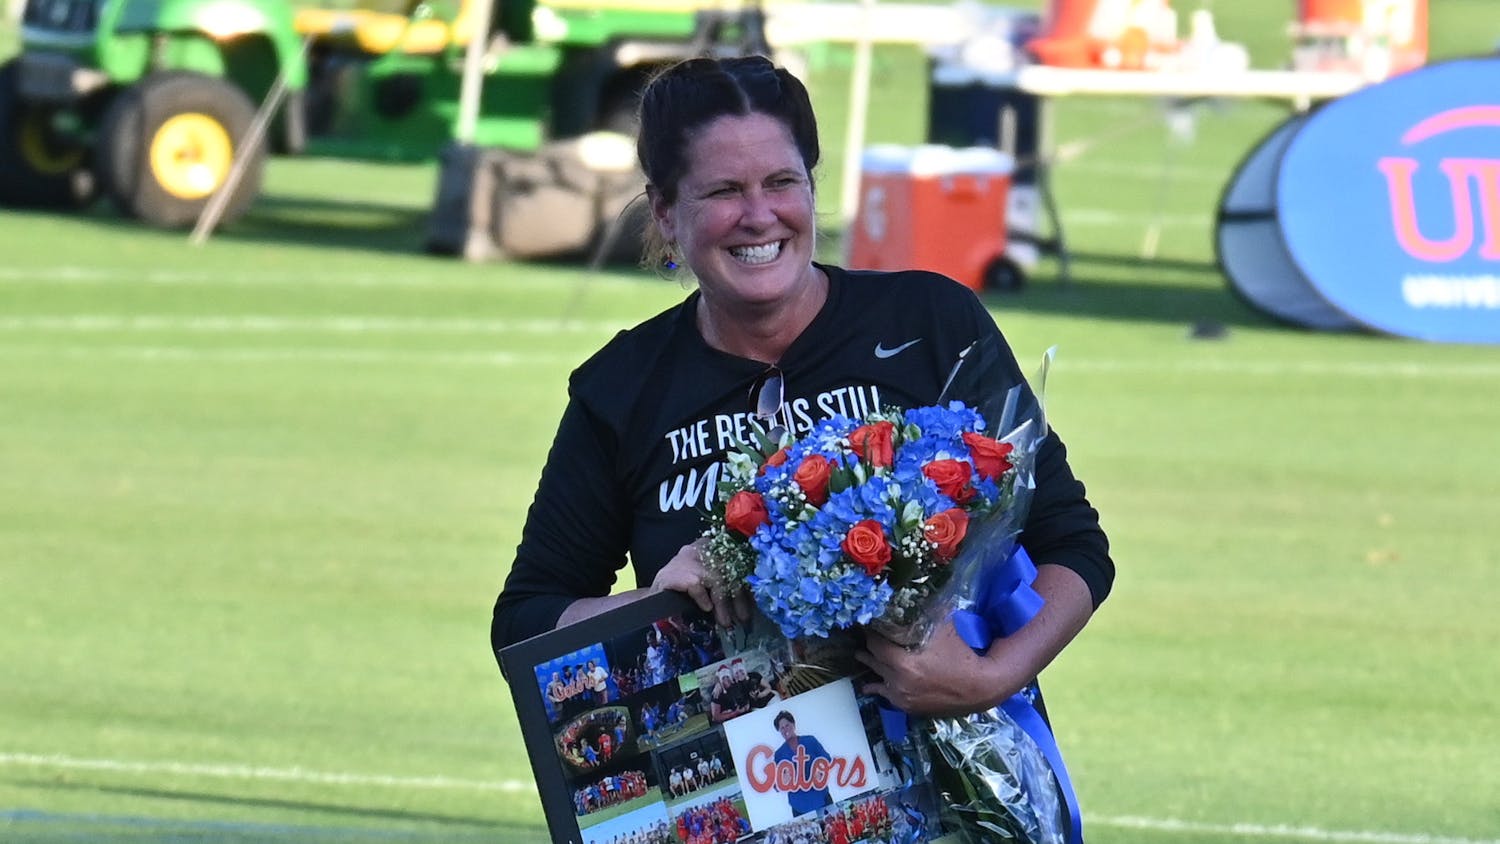 Florida’s 3-1 win against Georgia Southern Thursday night marked Burleigh's last home game as she retires at the season’s end. Photo from UF-Georgia Southern game.